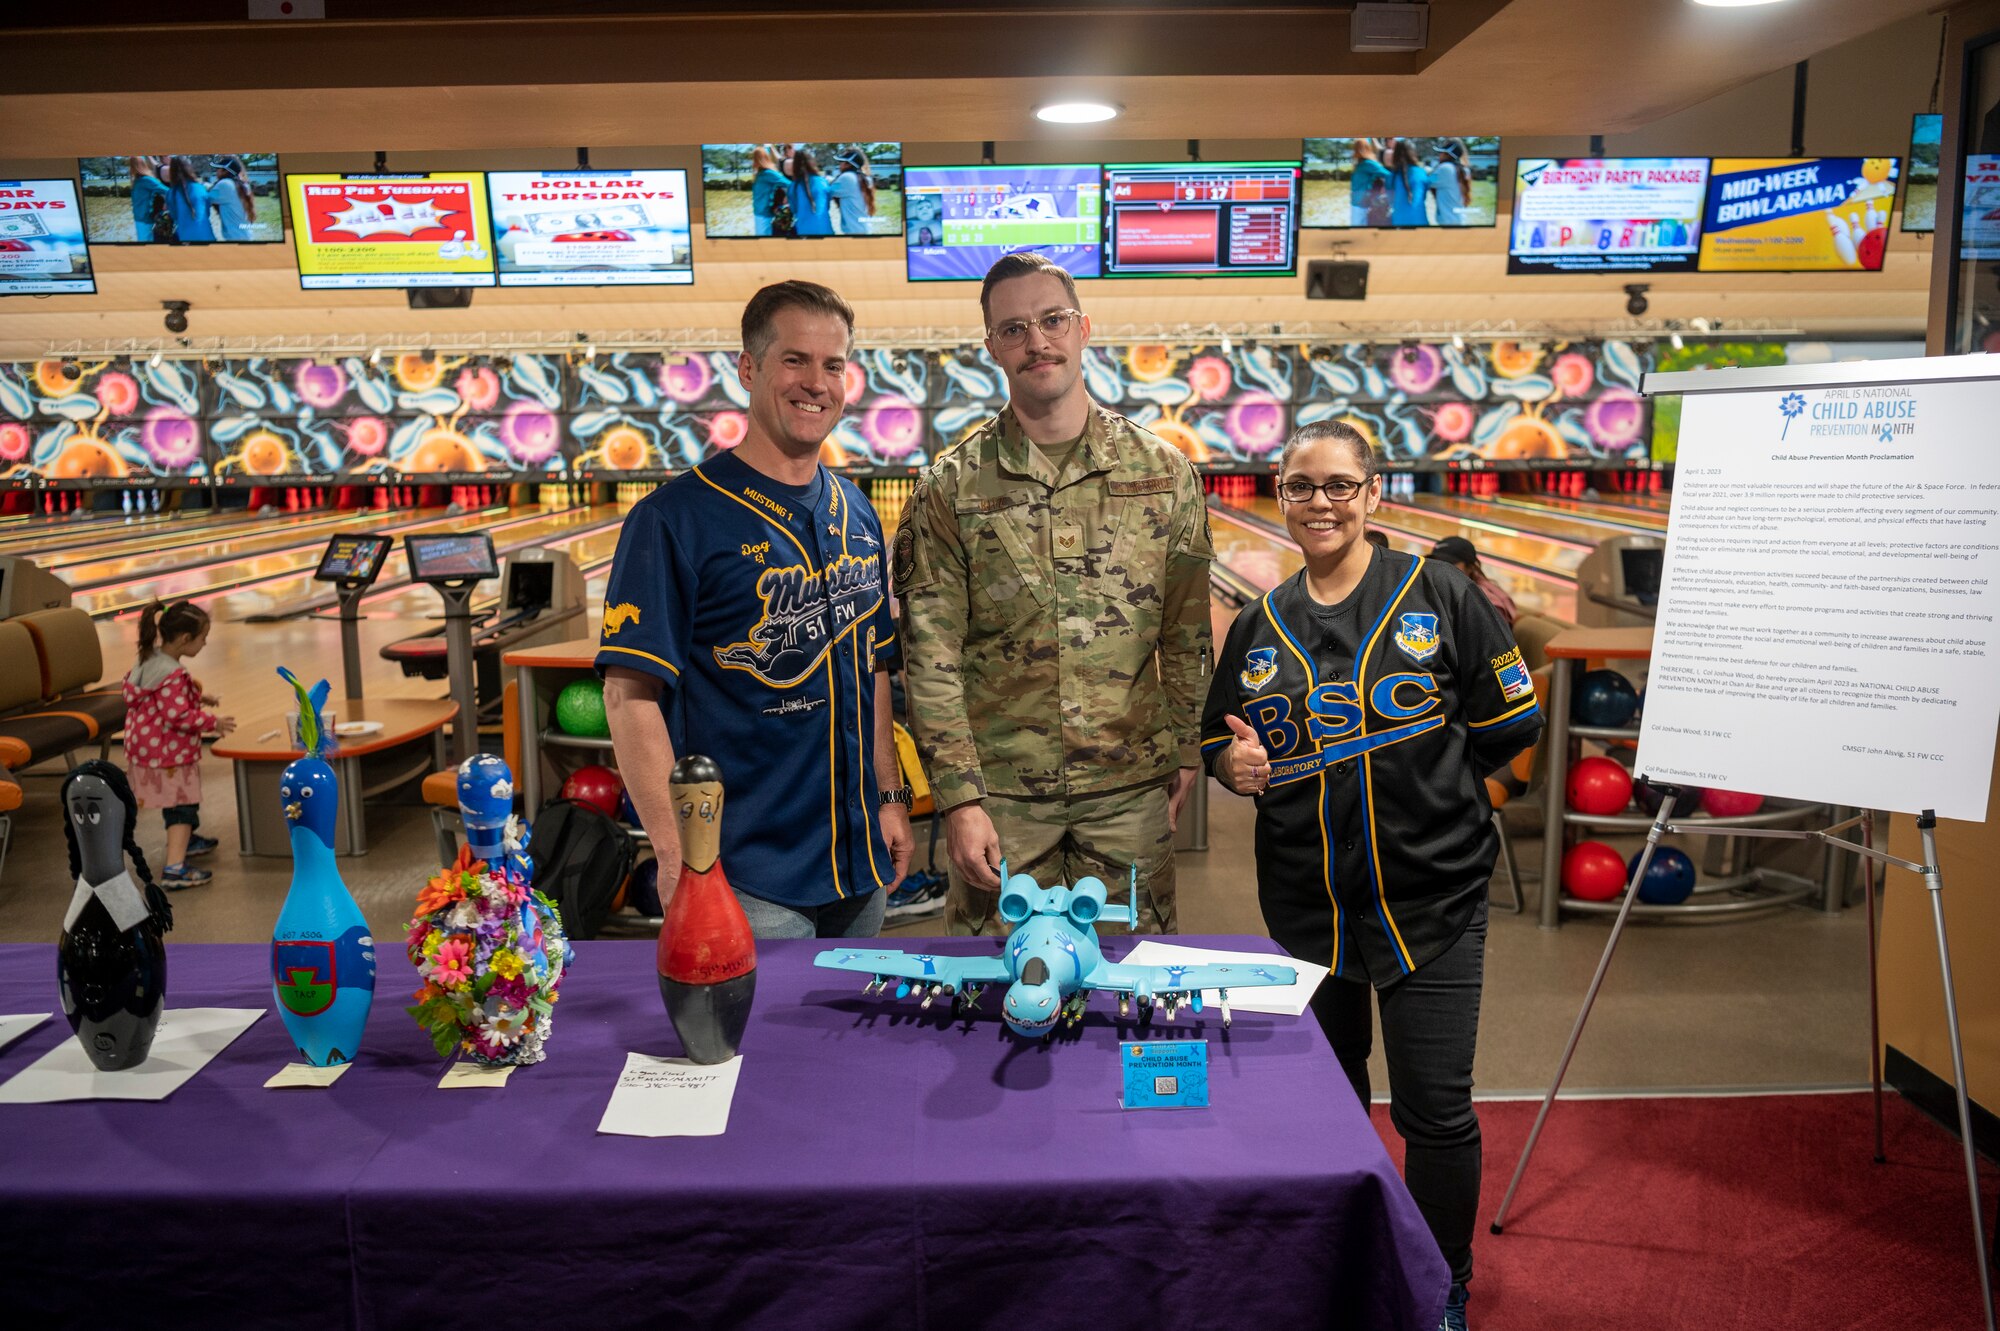 U.S. Air Force Col. Joshua Wood, 51st Fighter Wing commander, Chief Master Sgt. Lisa Thrasher-Stallard, 51st Medical Group command chief, and Senior Airman Andrew Kitz, 25th Fighter Generation Squadron crew chief, pose for a photo with Kitz’s winning pin for bowling pin decoration contest at Osan Air Base, Republic of Korea, April 7, 2023. The contest was held in observation of National Child Abuse Prevention Month. (U.S. Air Force photo by Airman 1st Class Aaron Edwards)